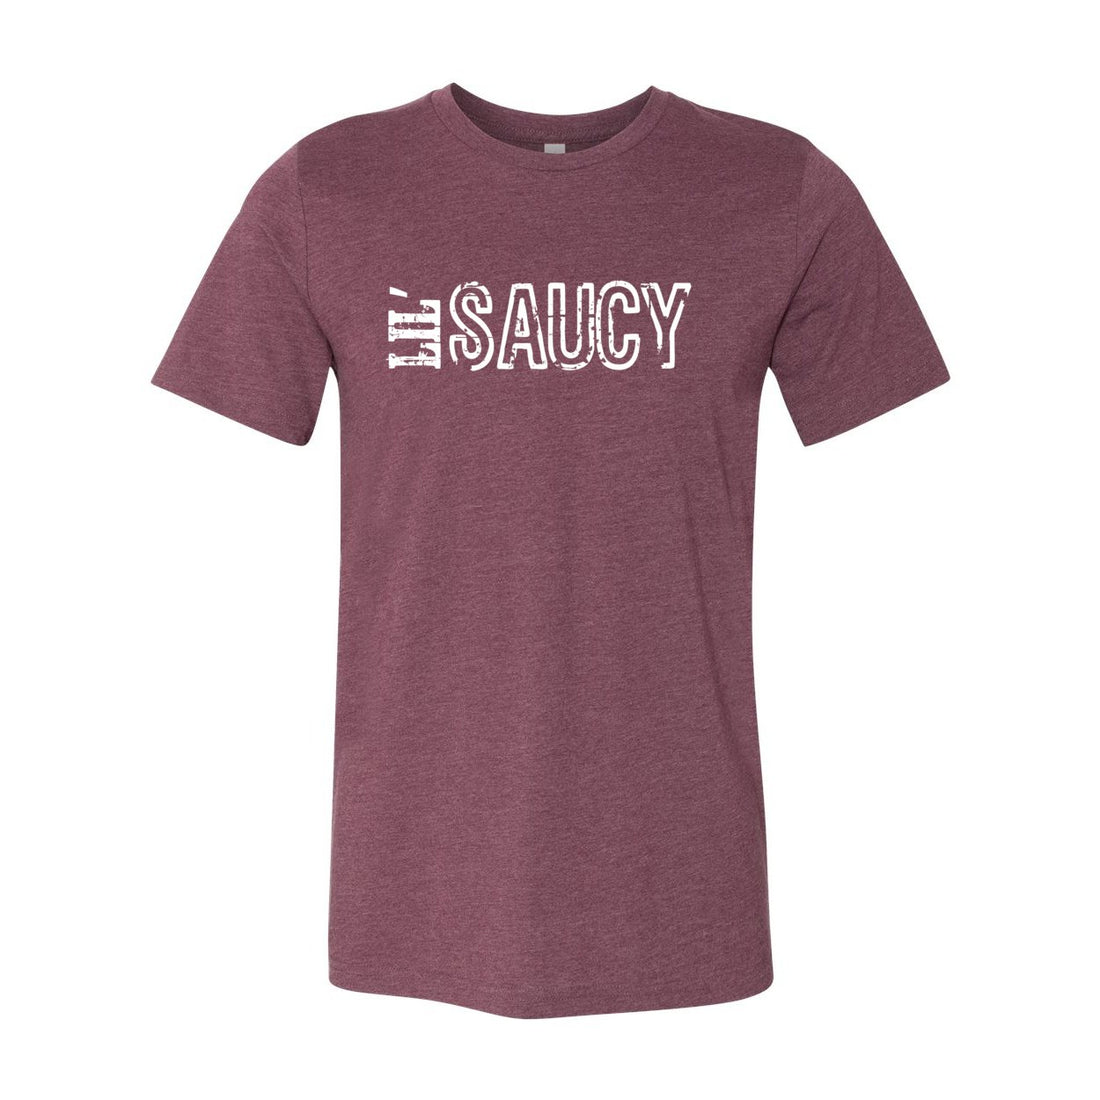 Lil' Saucy Short Sleeve Jersey Tee - T-Shirts - Positively Sassy - Lil' Saucy Short Sleeve Jersey Tee